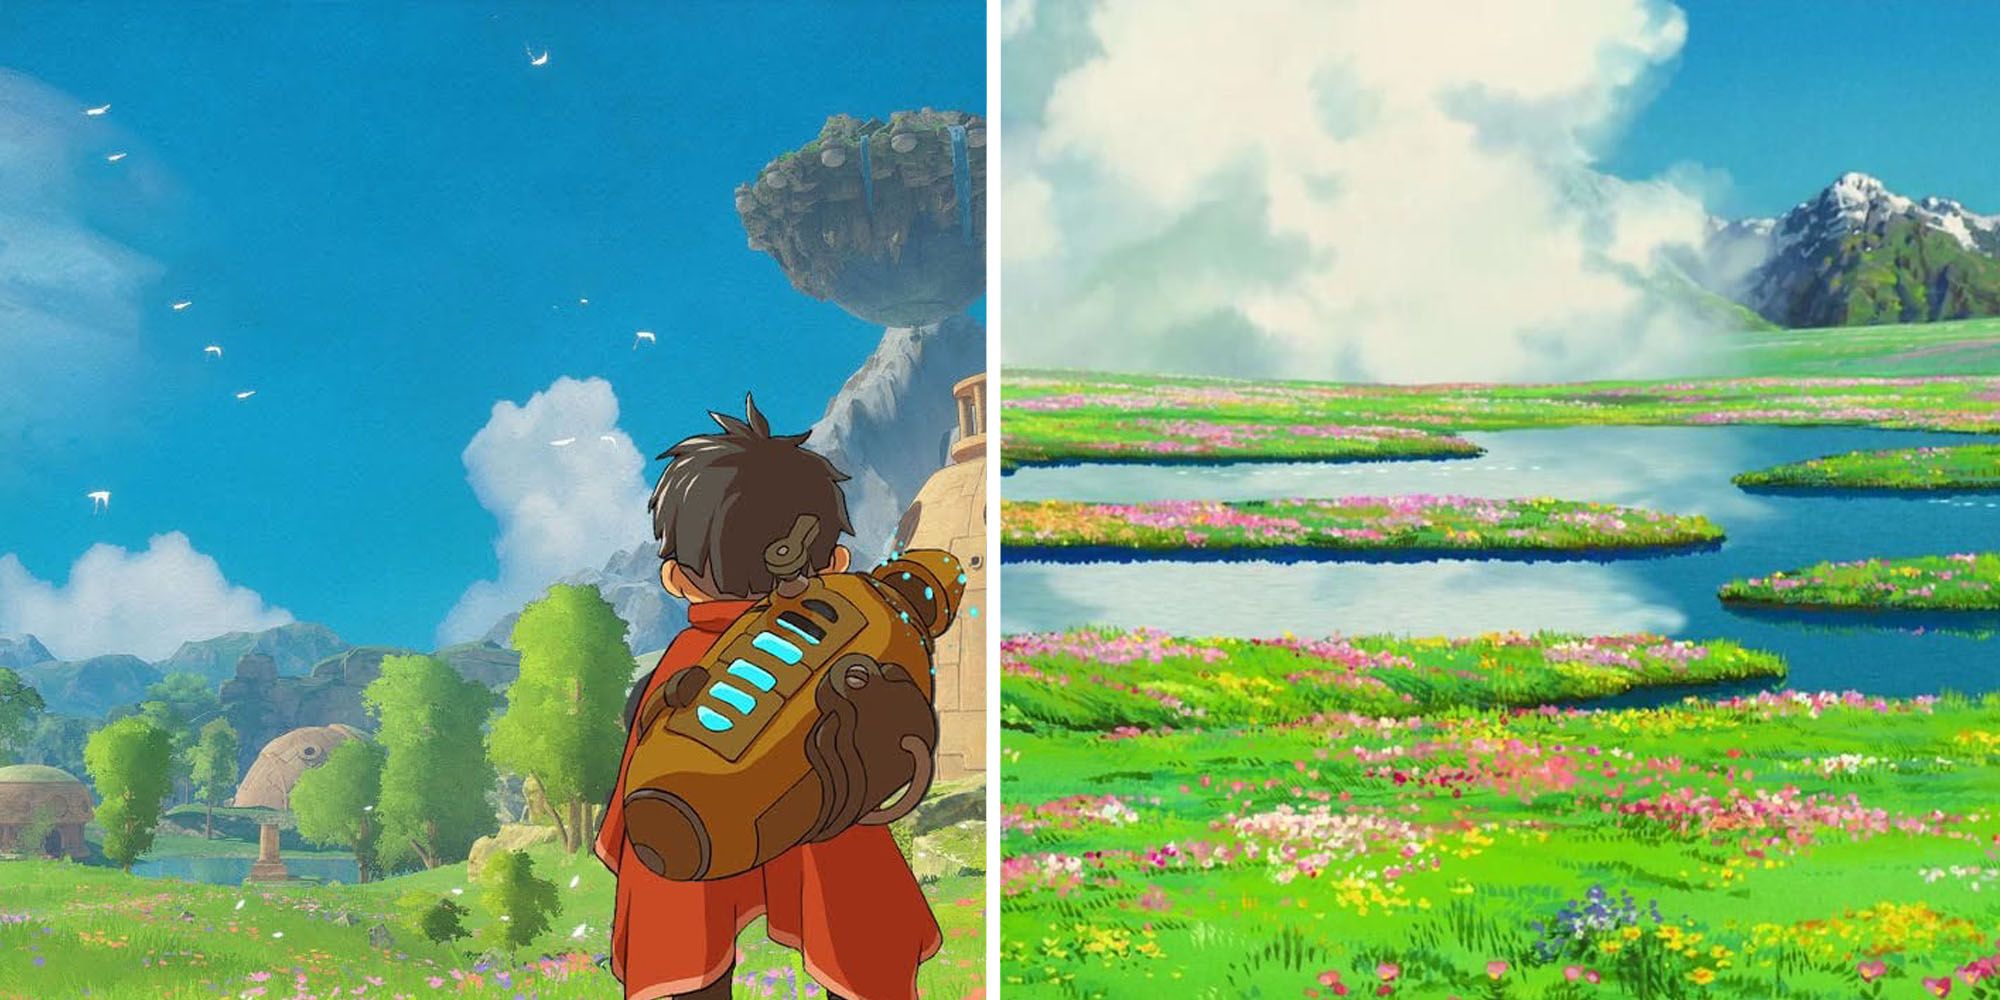 Animation sequences from Europa and Howl's Moving Castle